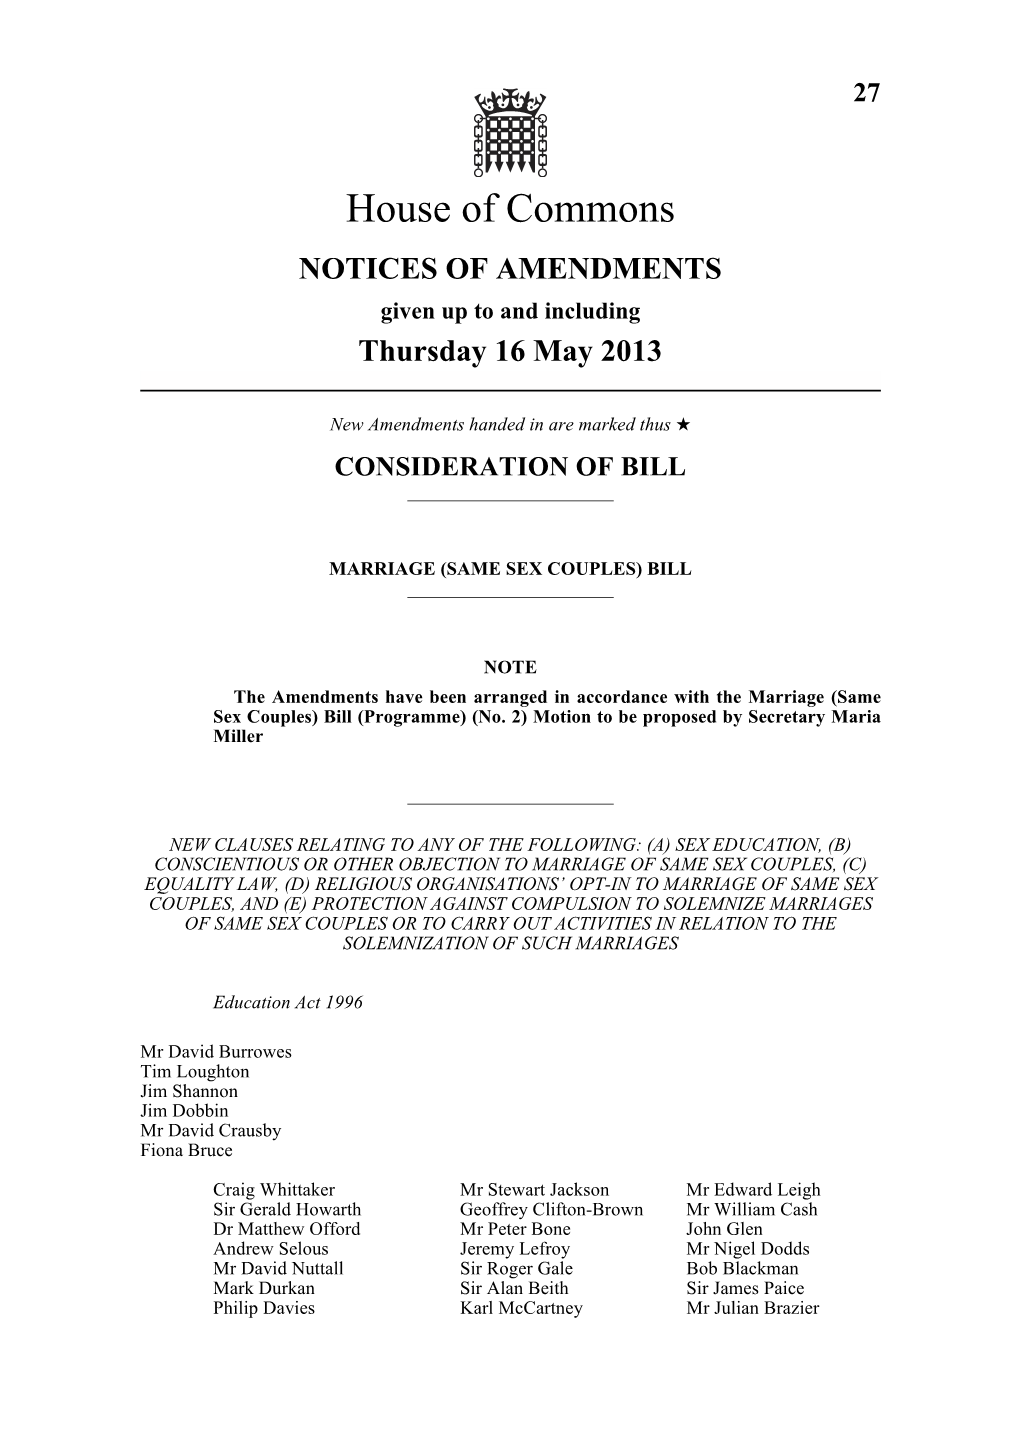 AMENDMENTS Given up to and Including Thursday 16 May 2013